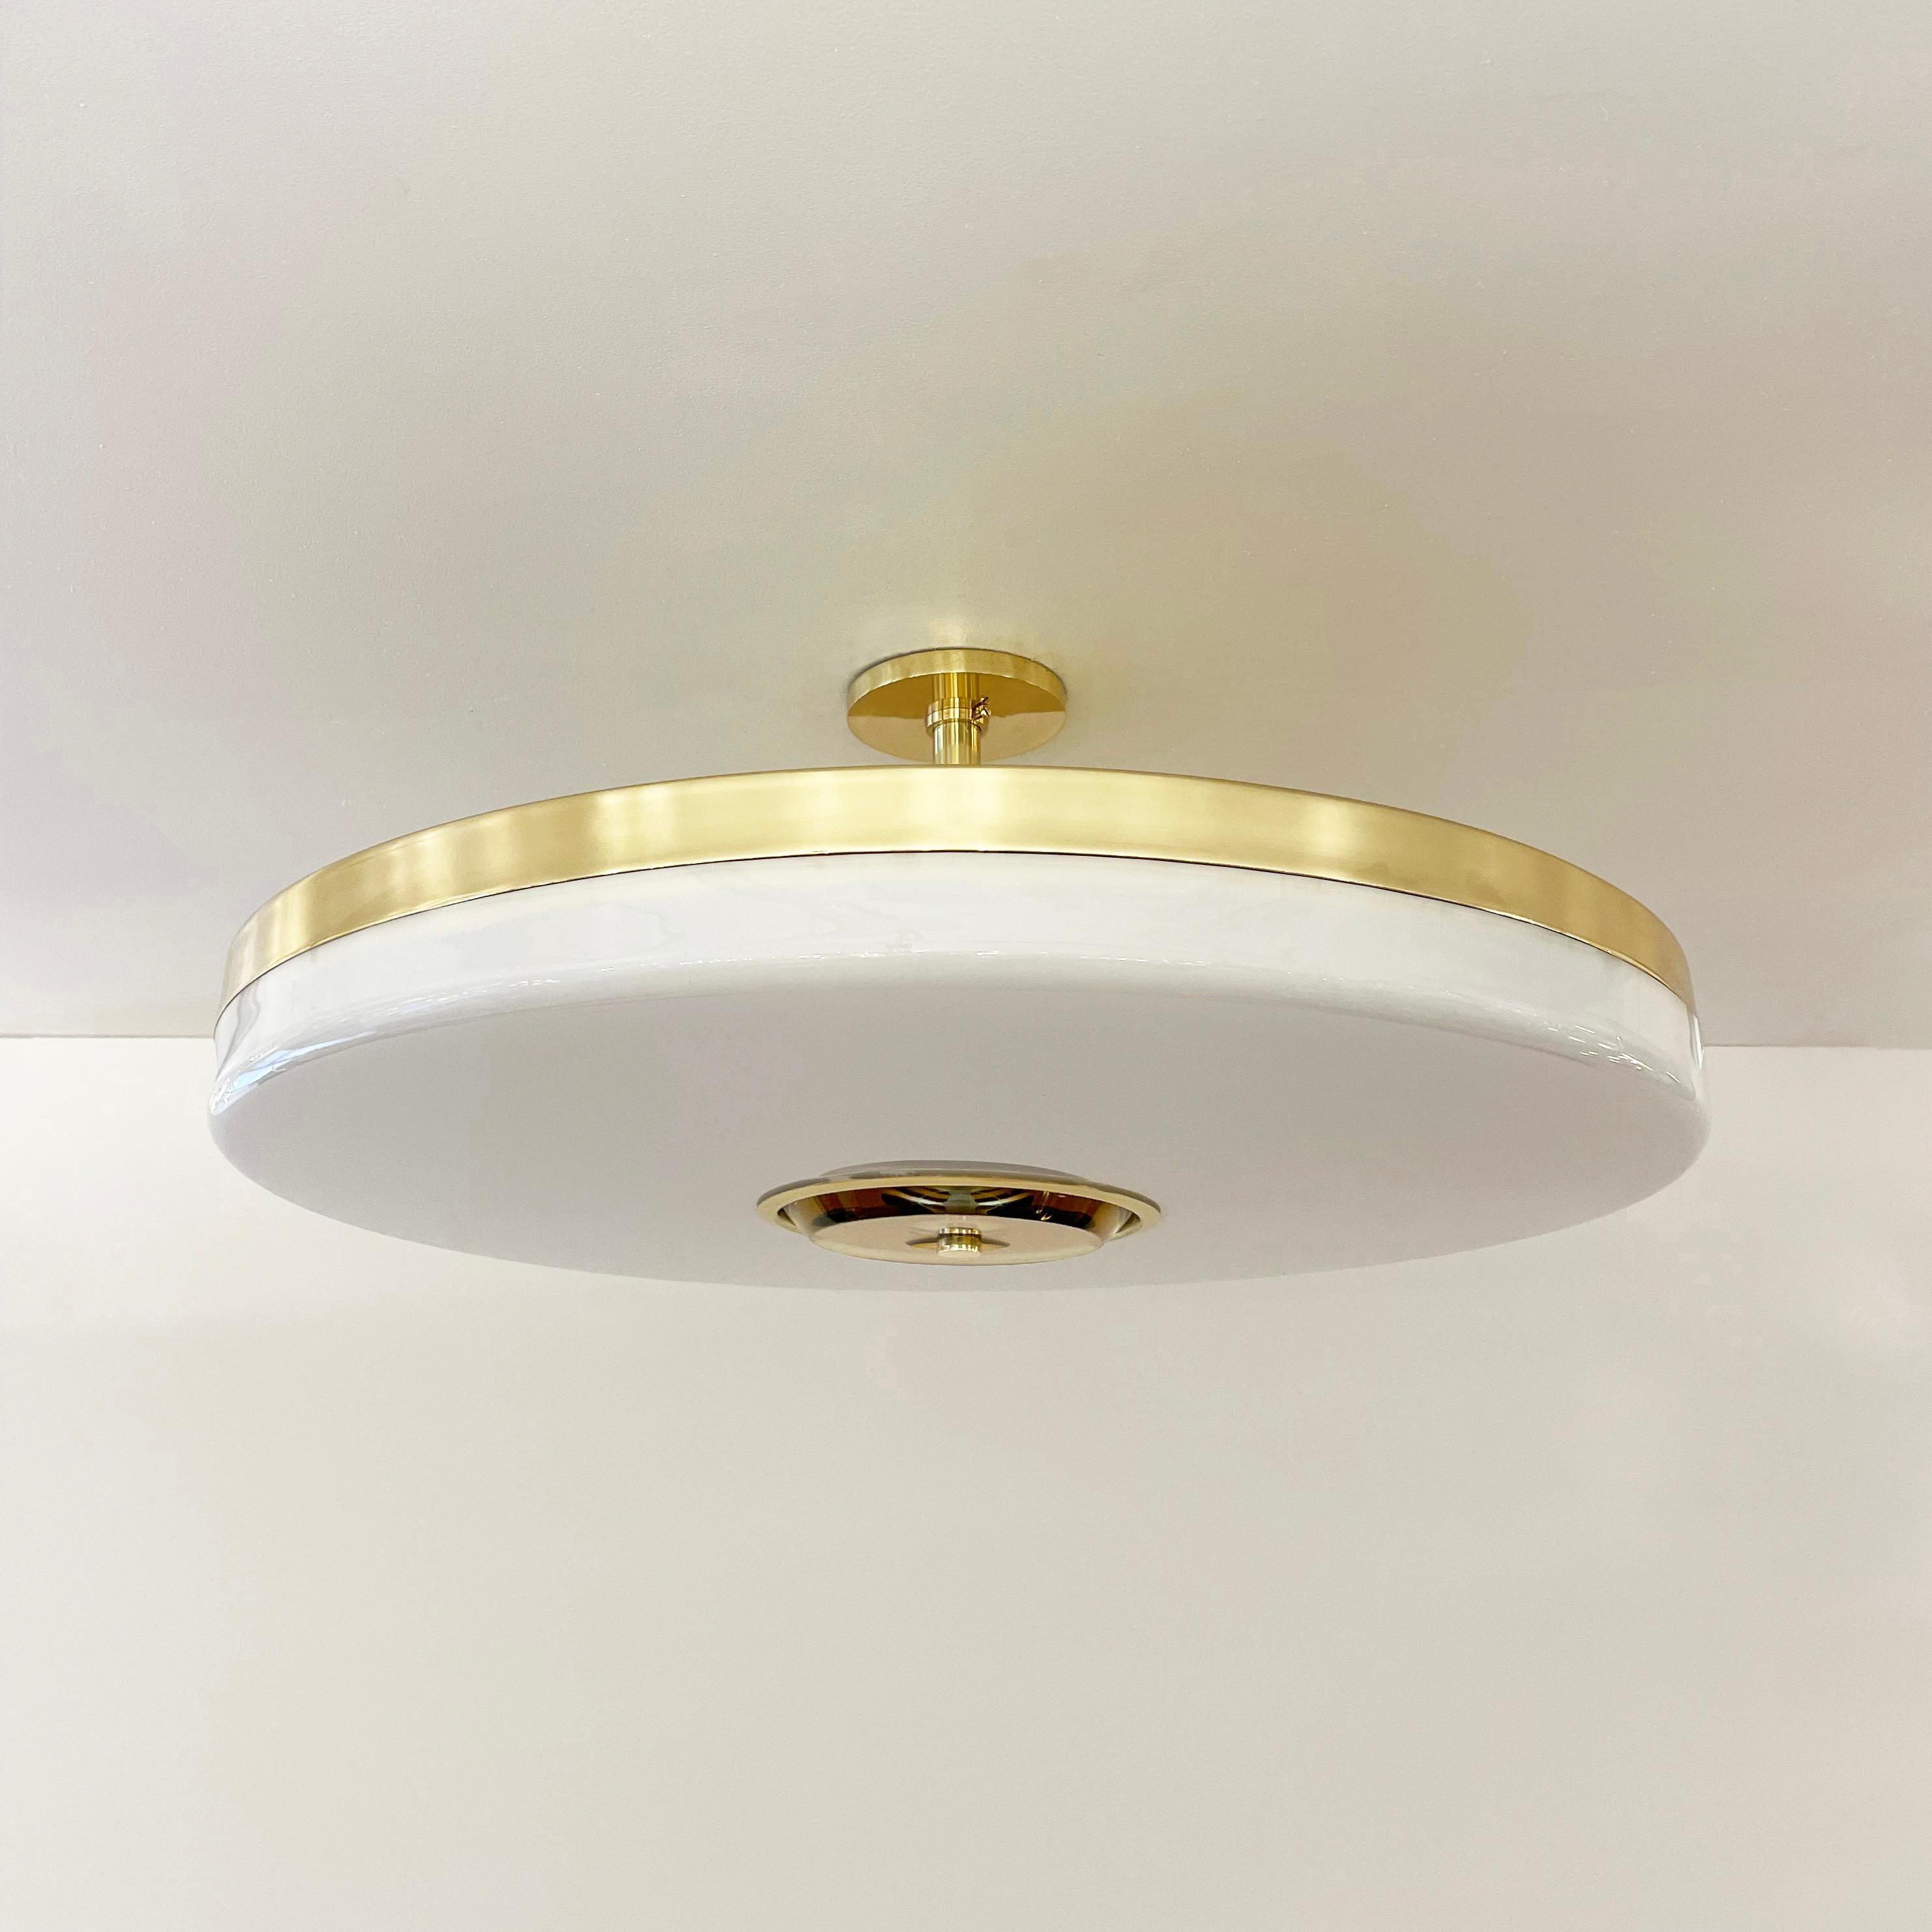 Iris Grande Ceiling Light by Gaspare Asaro - Polished Brass Finish In New Condition For Sale In New York, NY